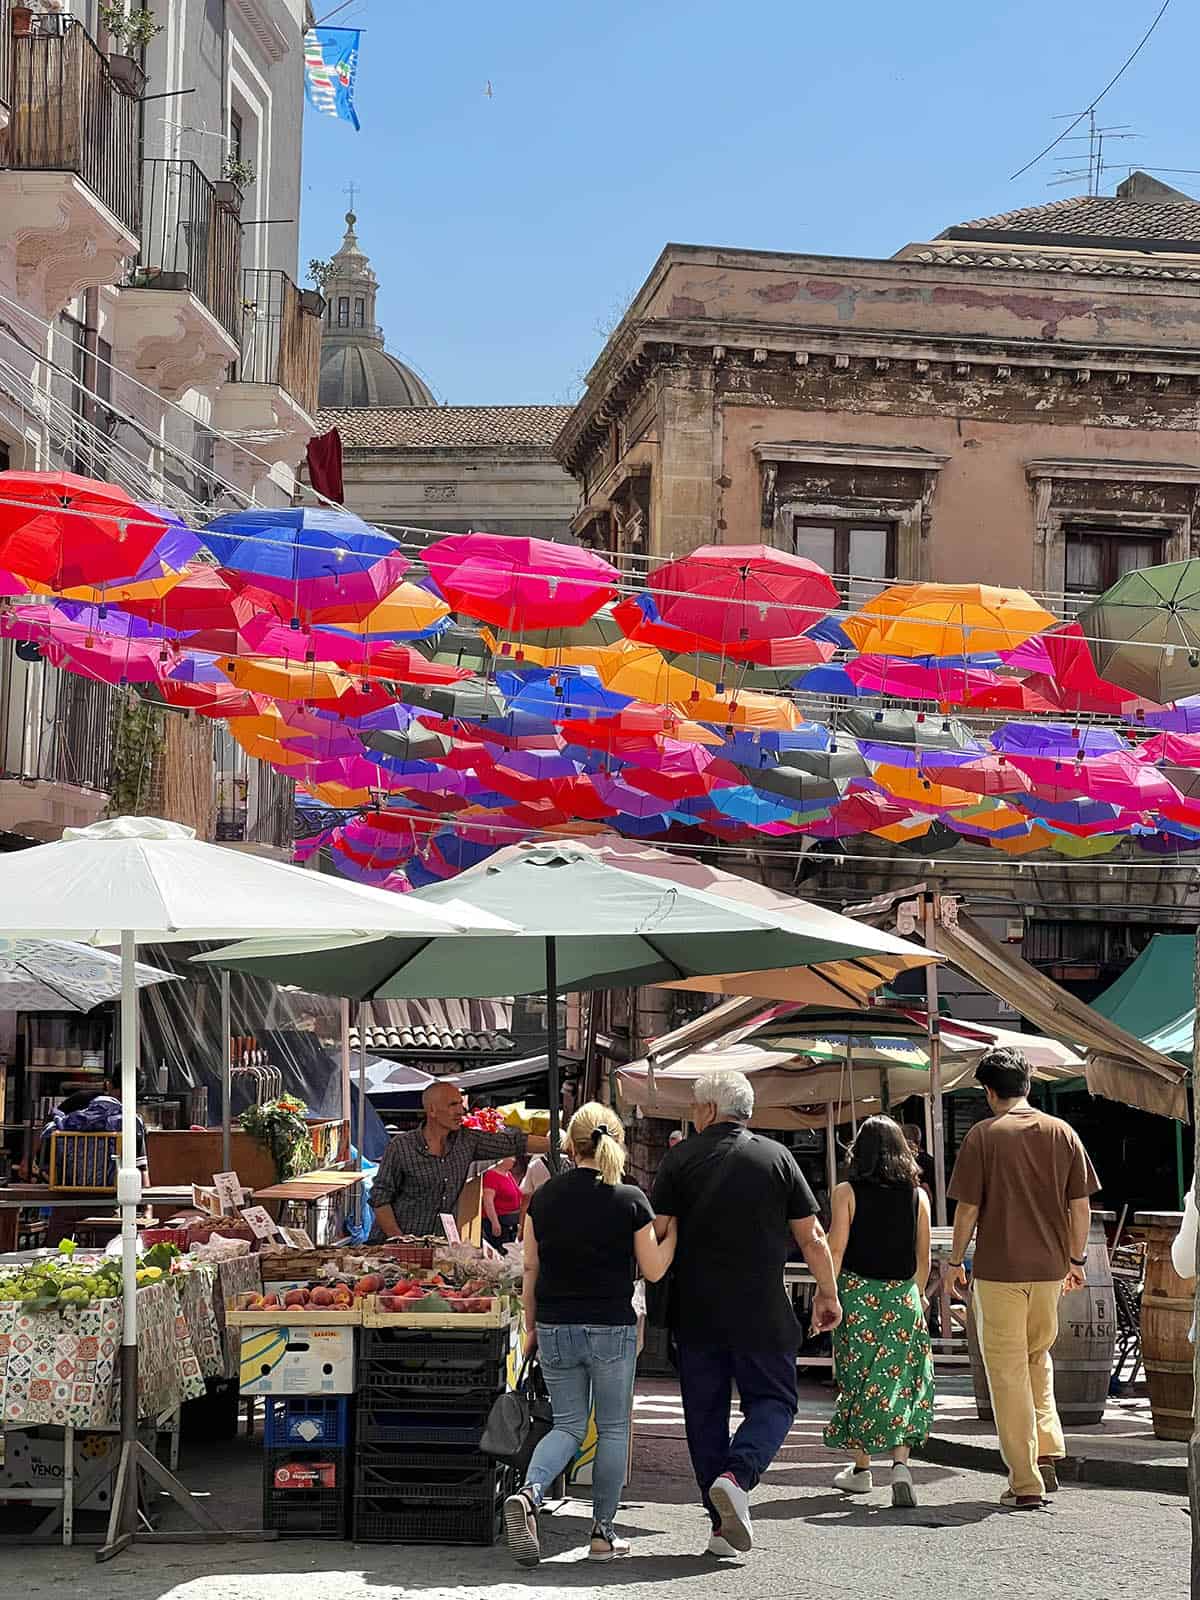 An image of the markets in Catania, Sicily. Bright coloured umbrella decoration shades the people and produce below, and the spire of the duomo sticks out in the background.